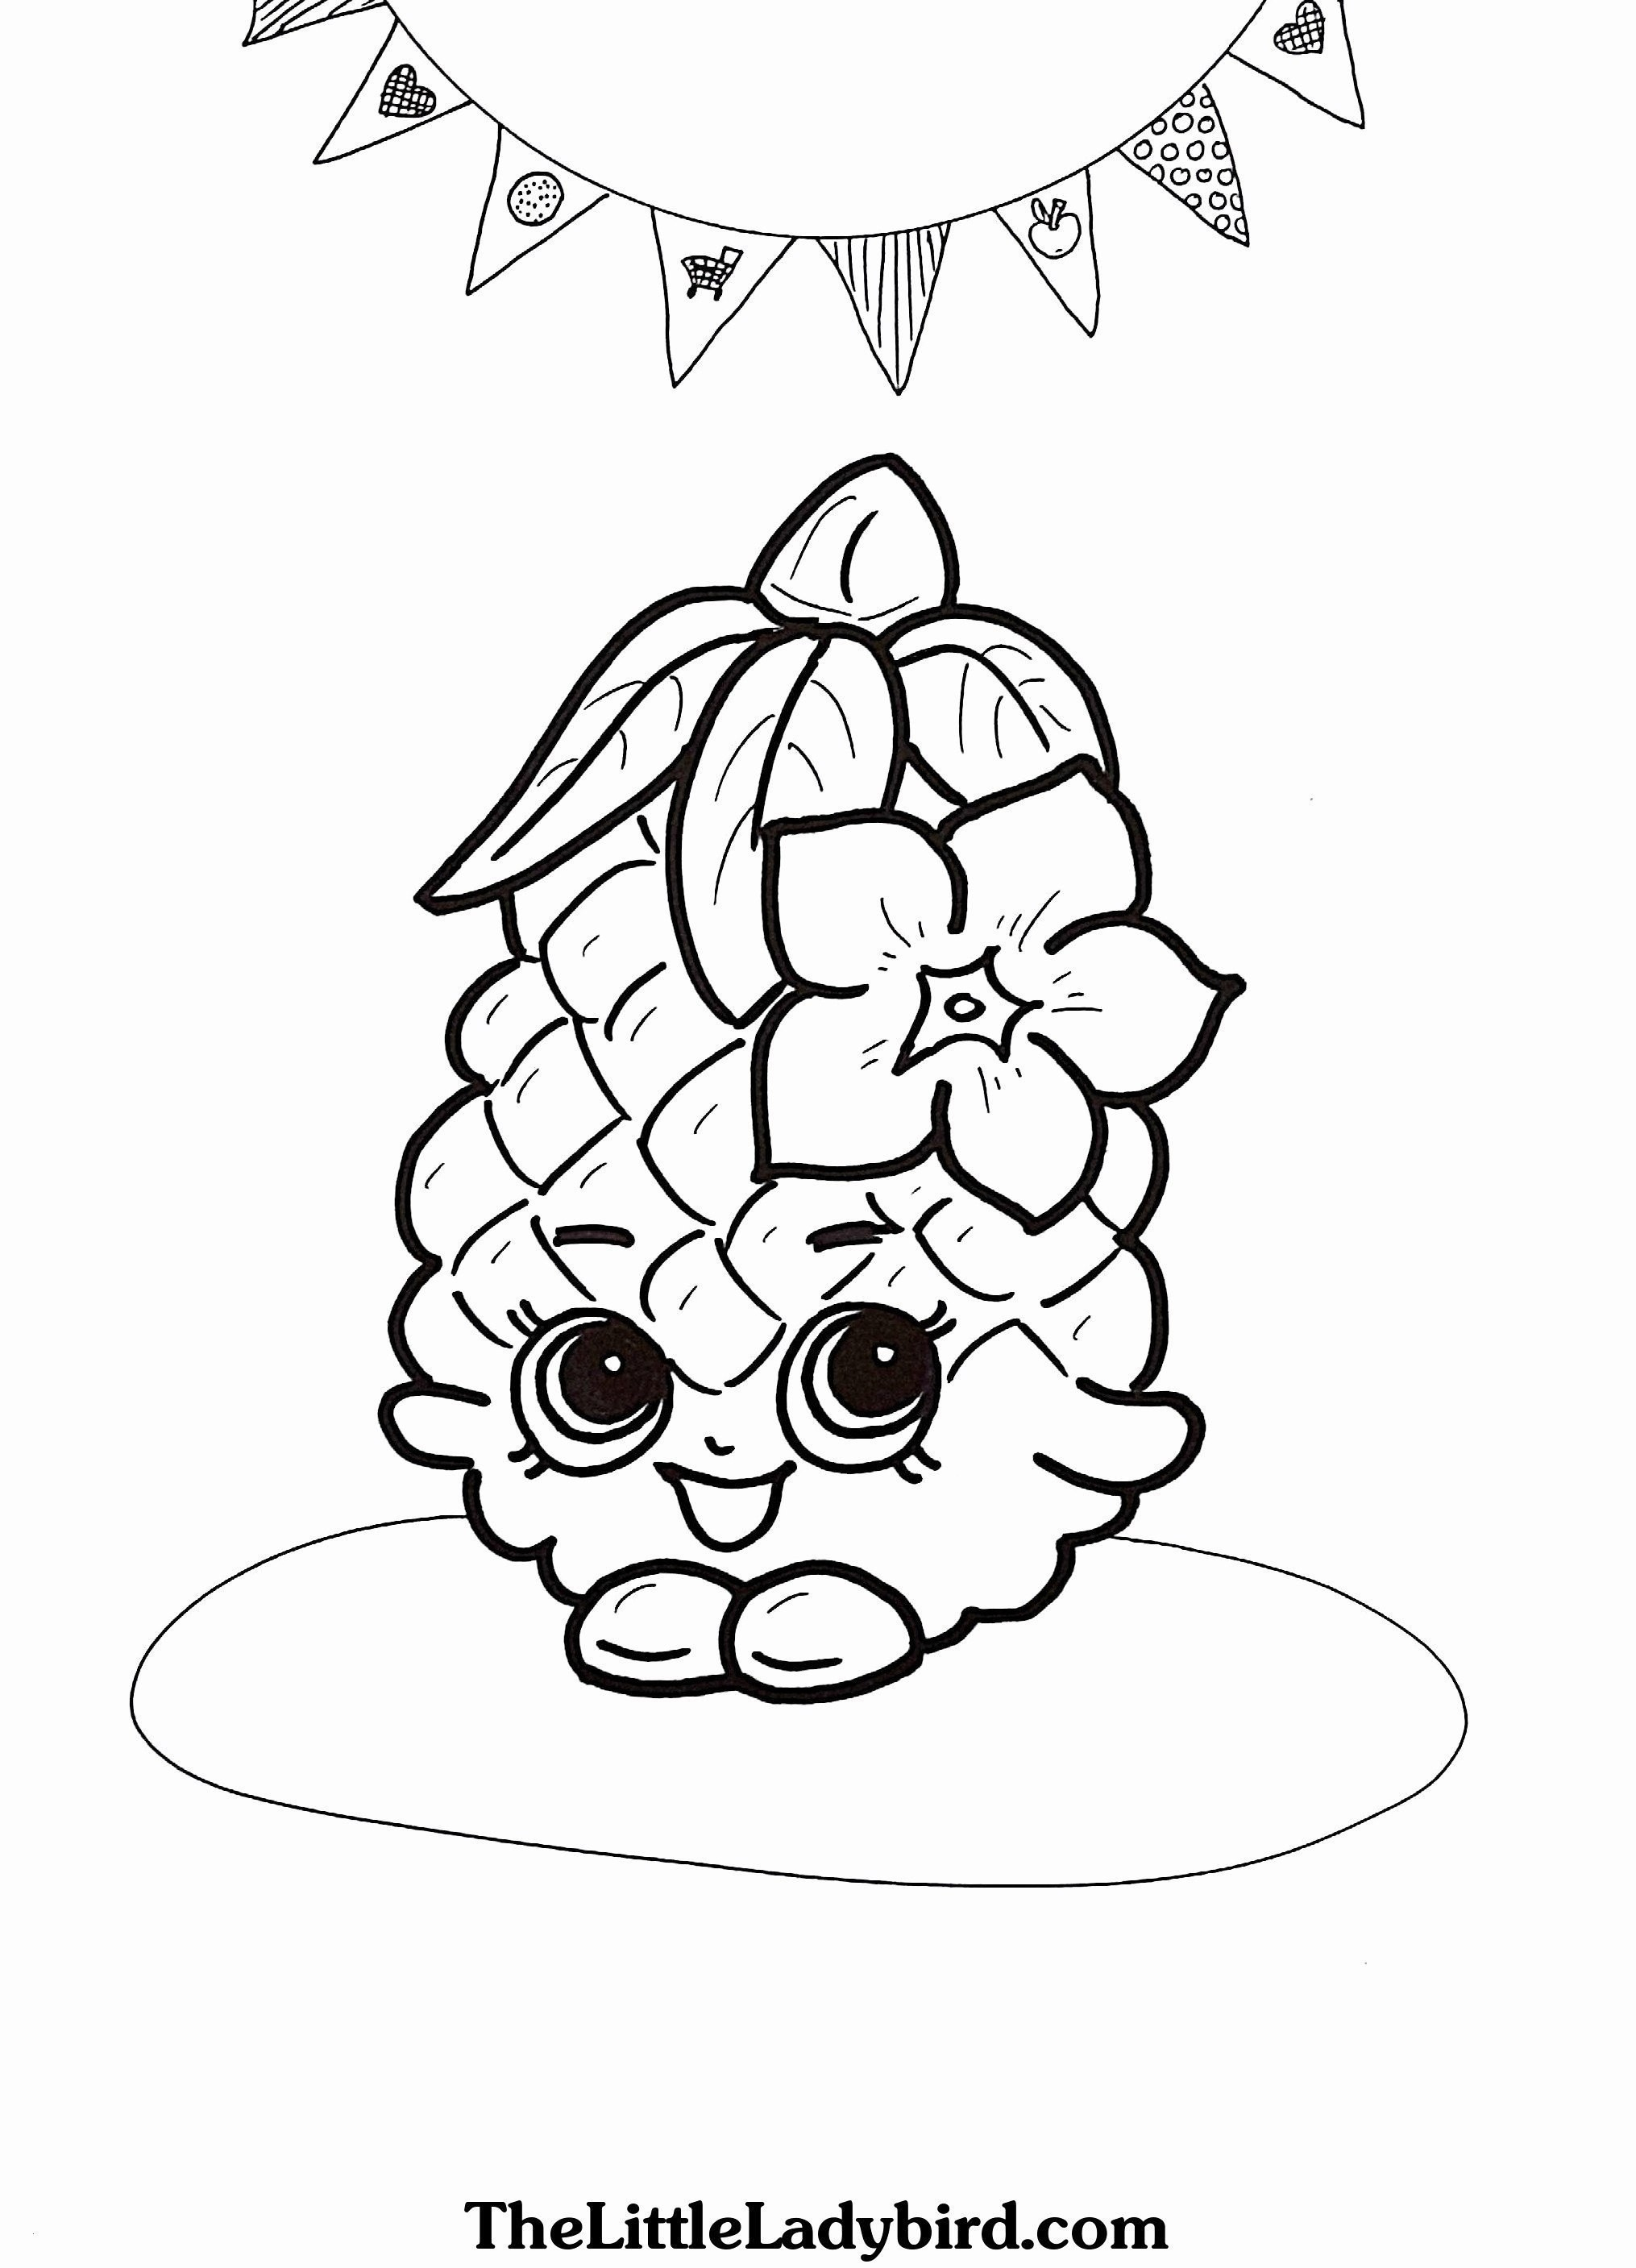 Free Custom Coloring Pages Category Coloring Page 59 Lrcp Coloring Page